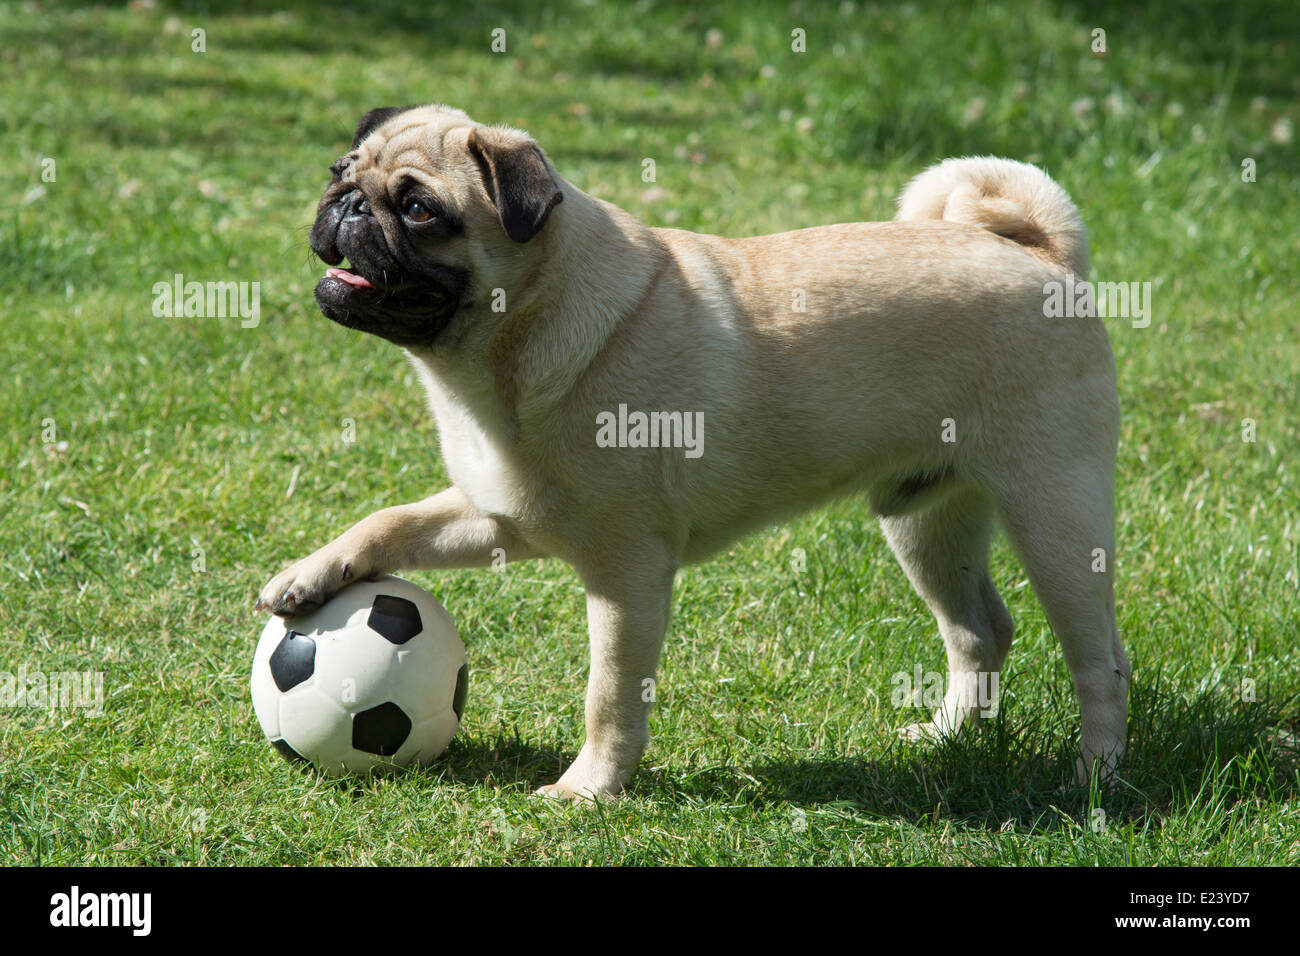 Pug with its paw on a football Stock Photo